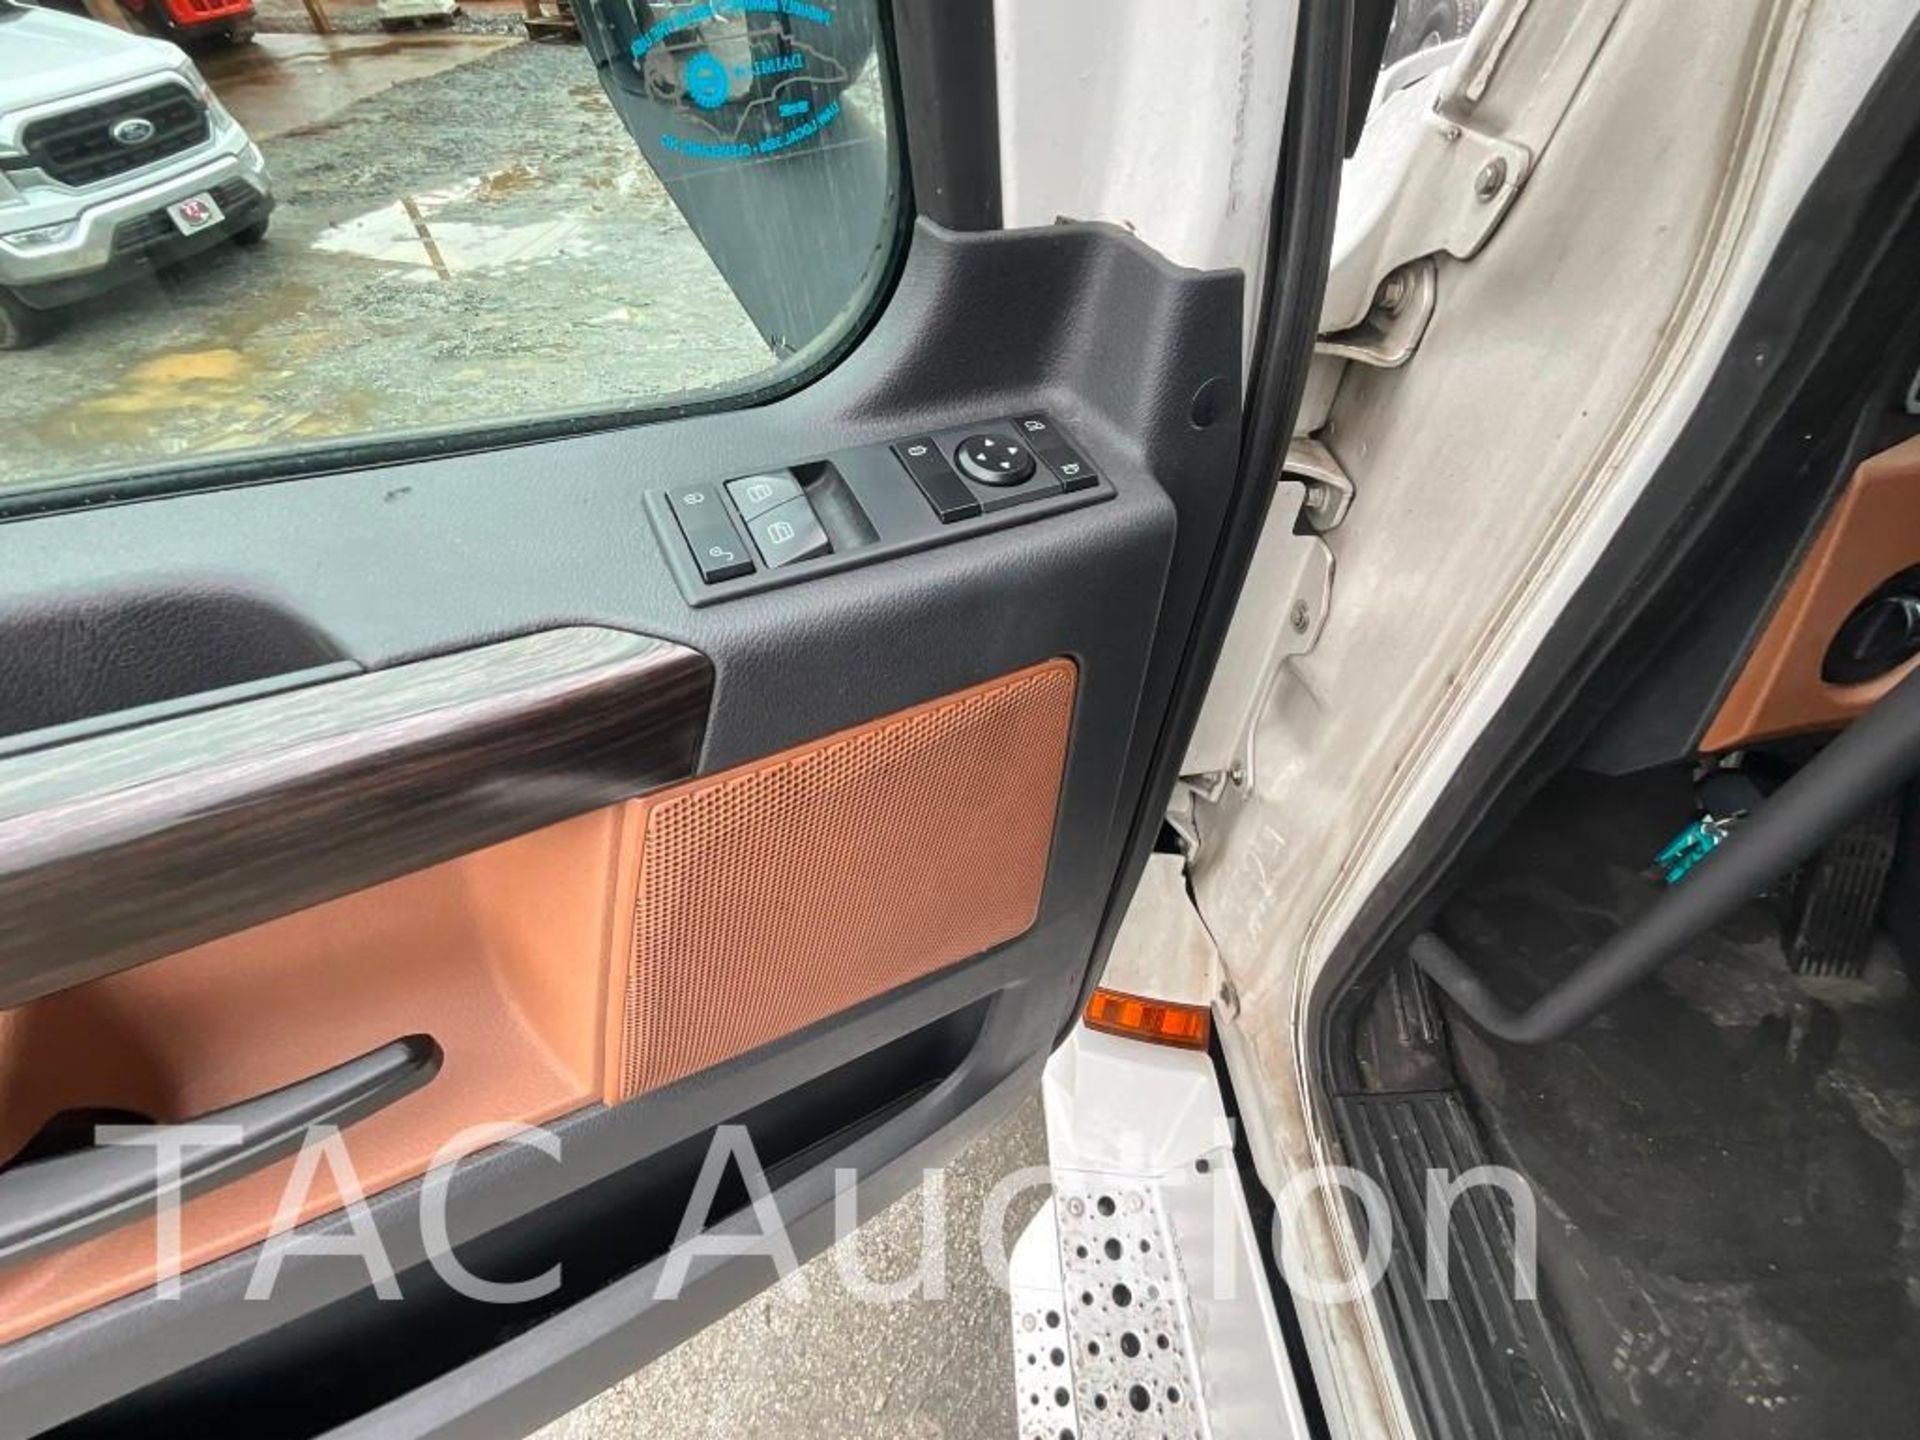 2019 Freightliner Cascadia Day Cab - Image 11 of 54